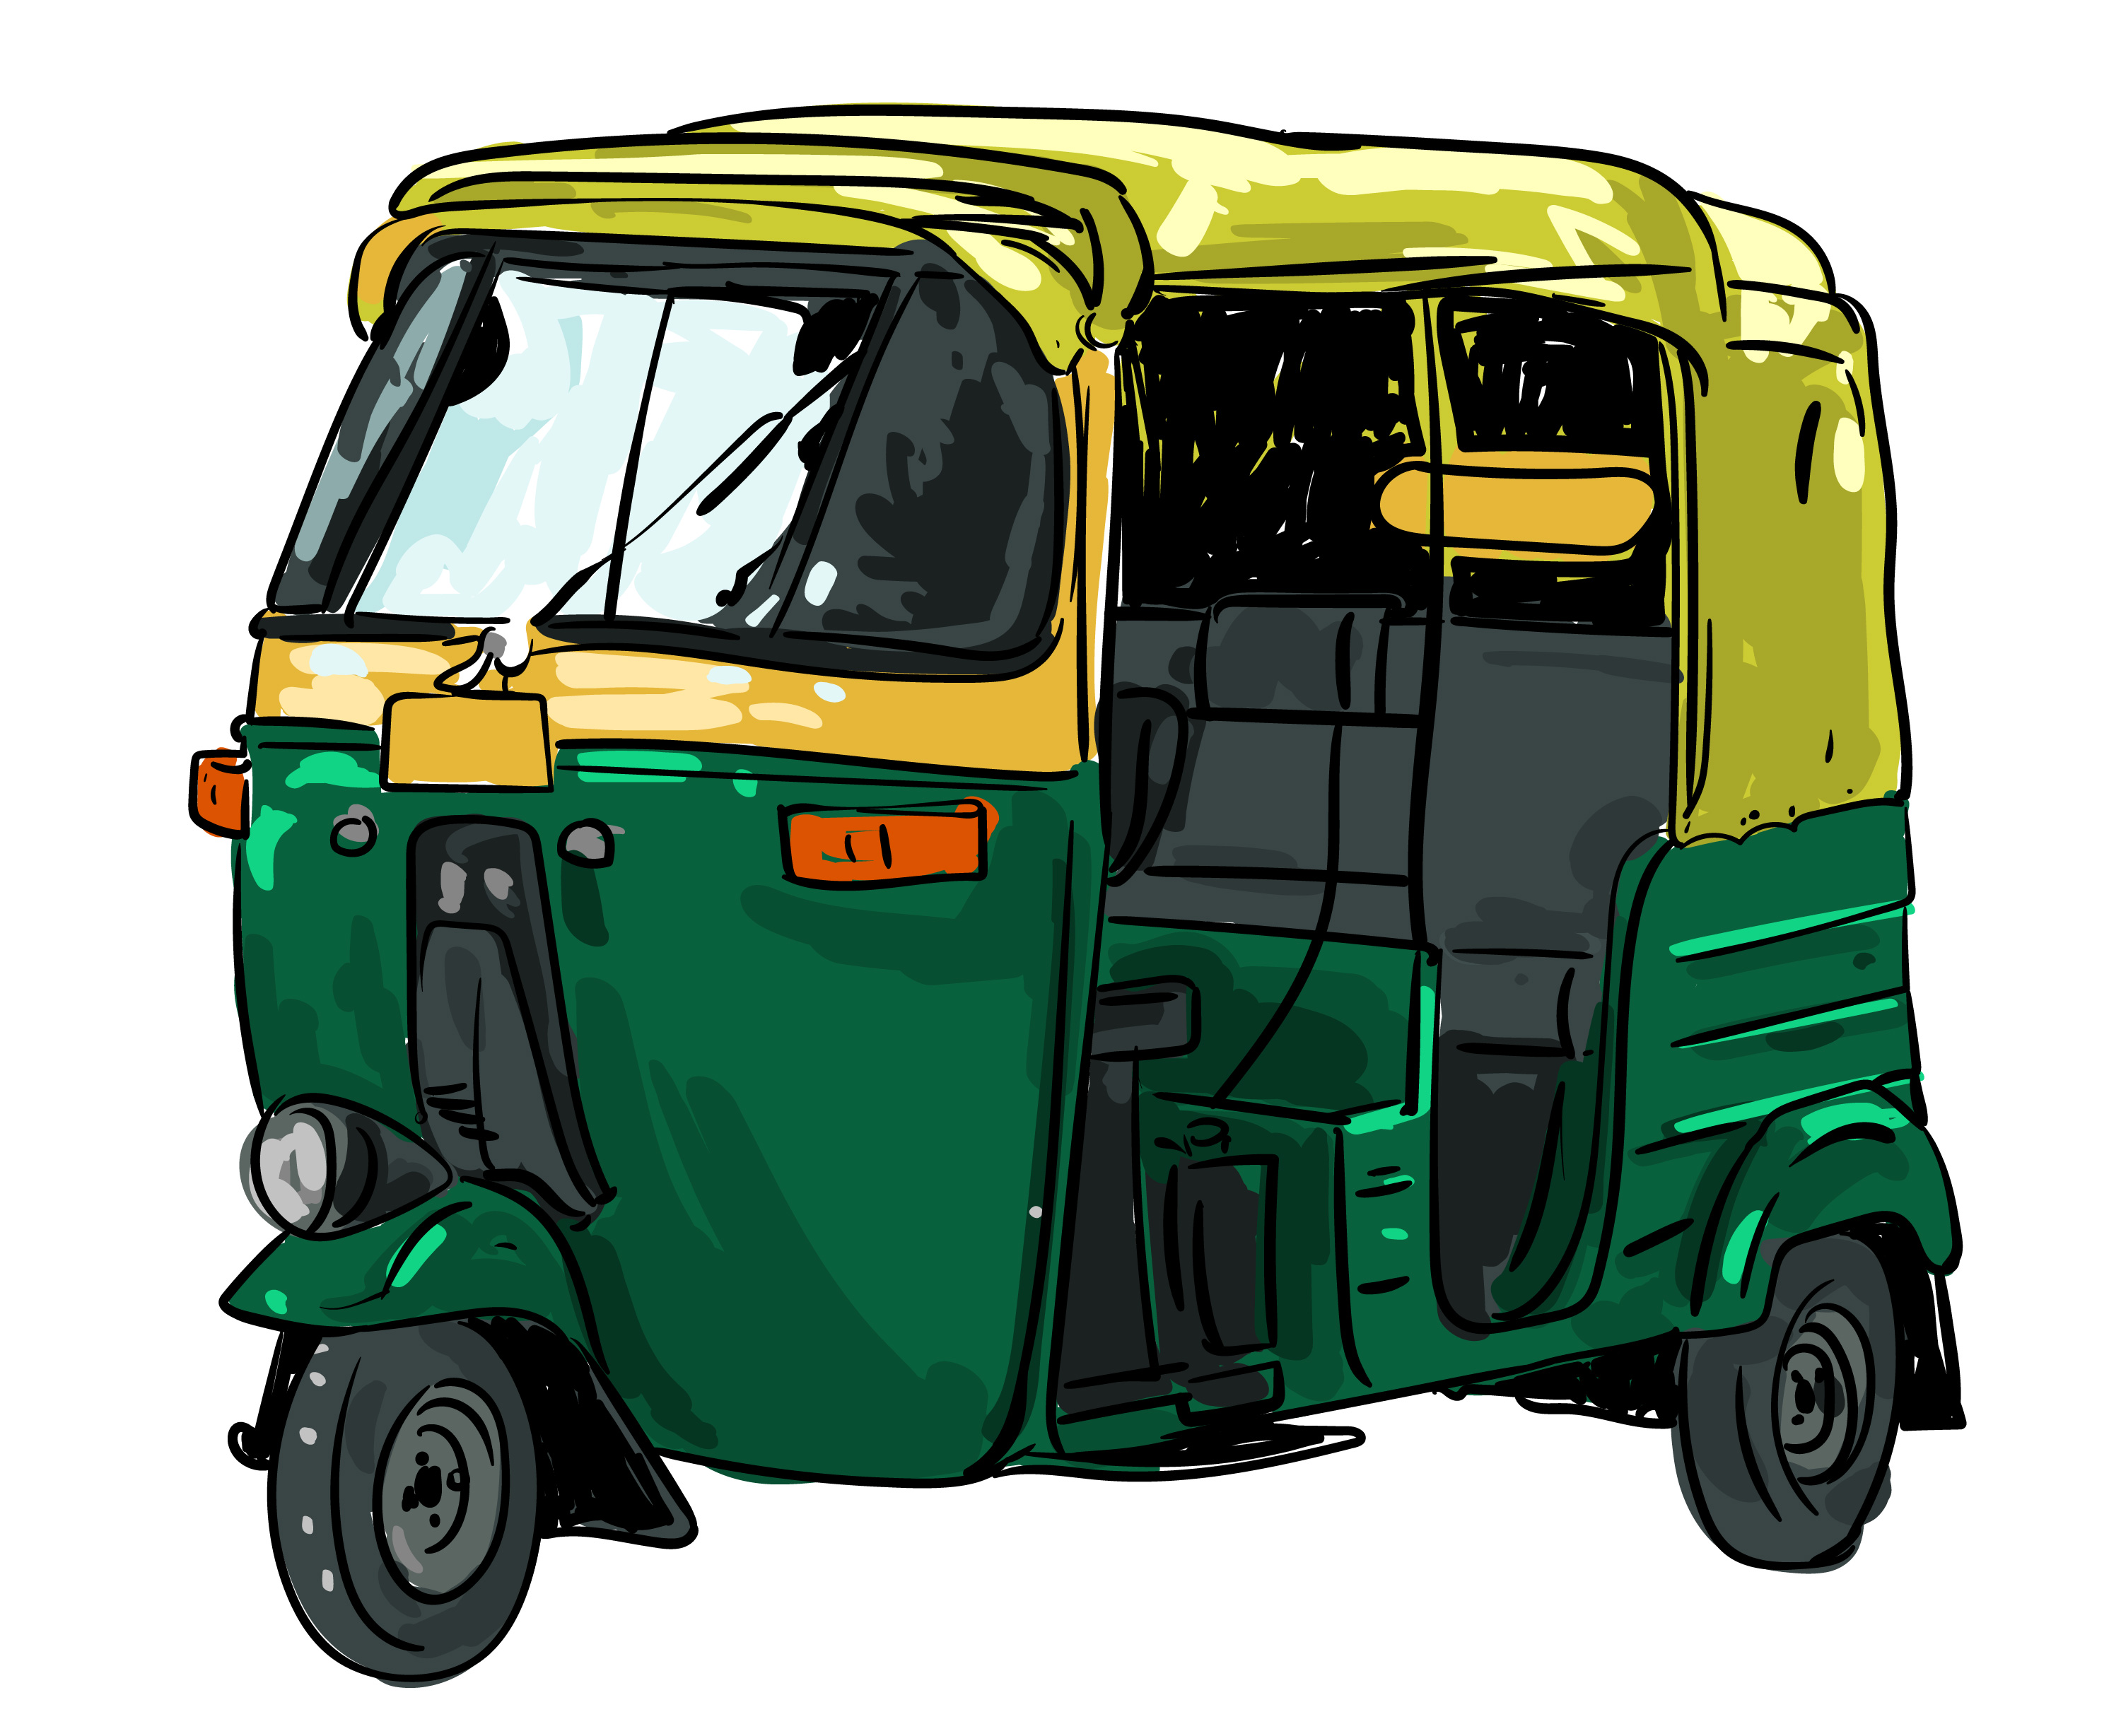 Indian Rickshaw Taxi Hand Drawn Stock Illustration  Download Image Now   Driving Sketch Car  iStock